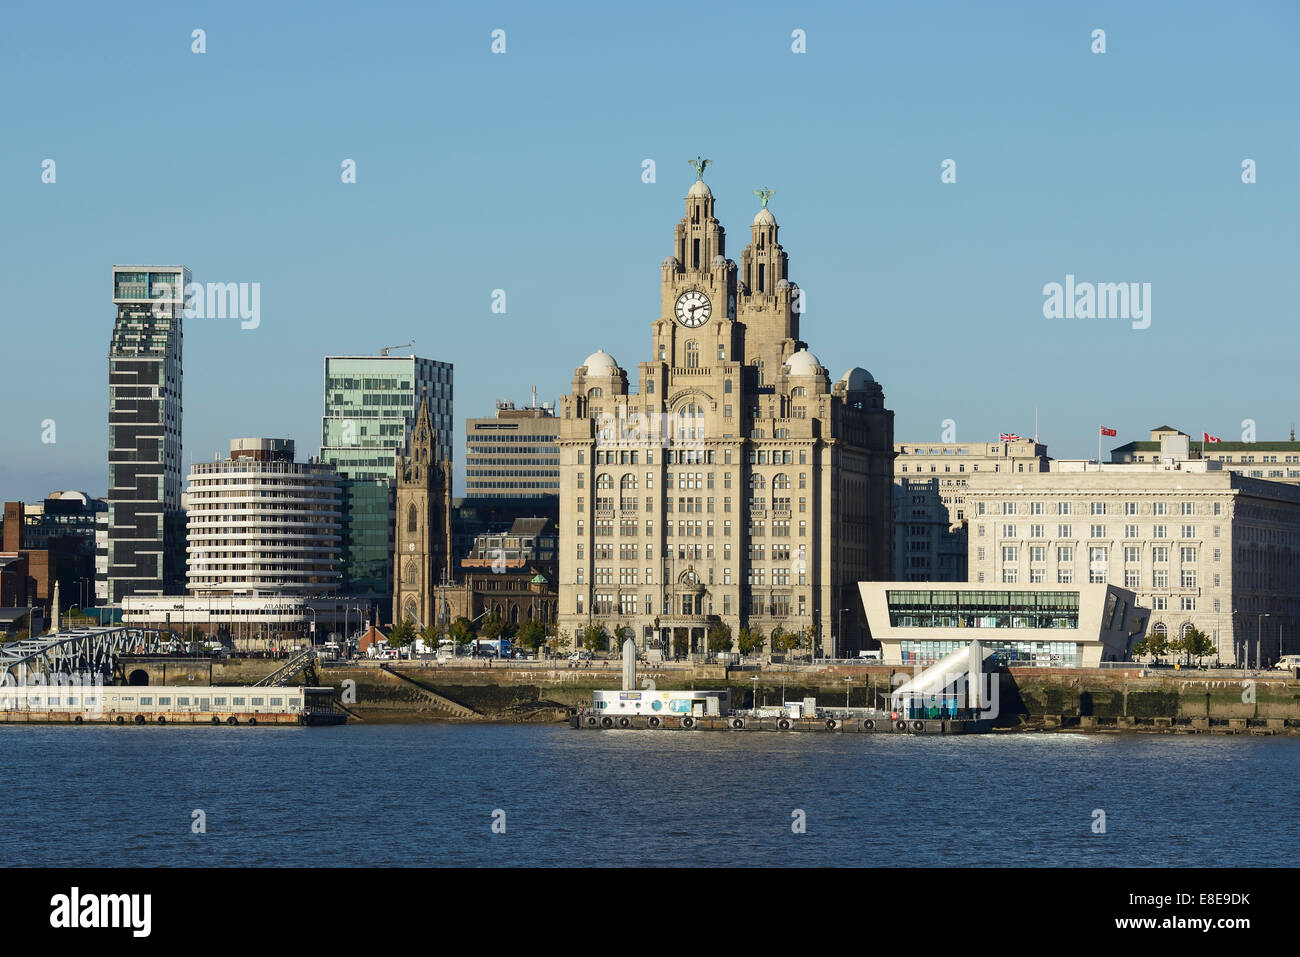 The liver building on the Liverpool waterfront Stock Photo